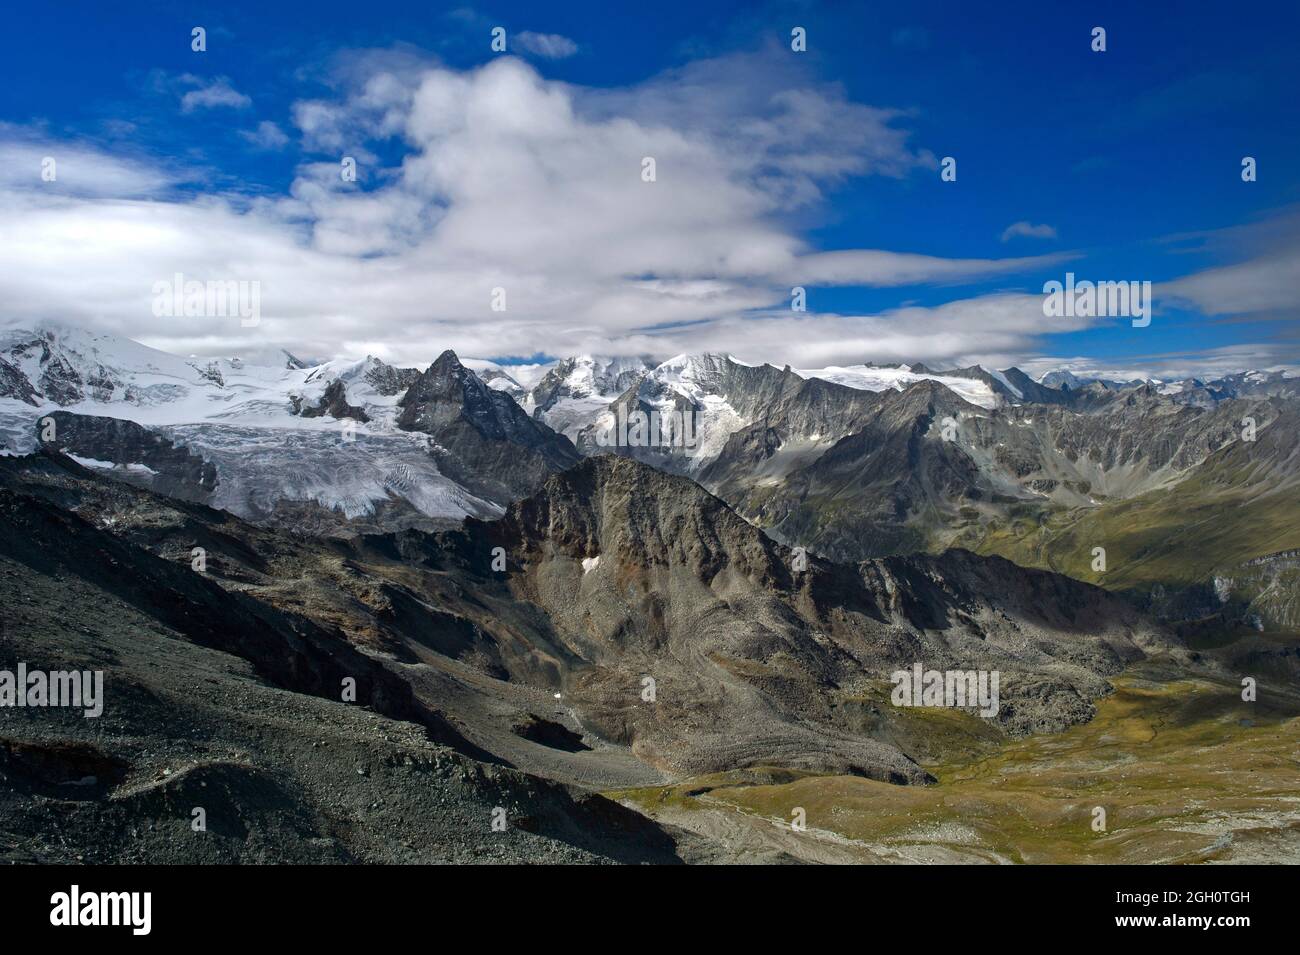 Alpine landscape with peaks and glaciers in Val dâ.Anniviers, Zinal, Wallis, Switzerland. Stock Photo